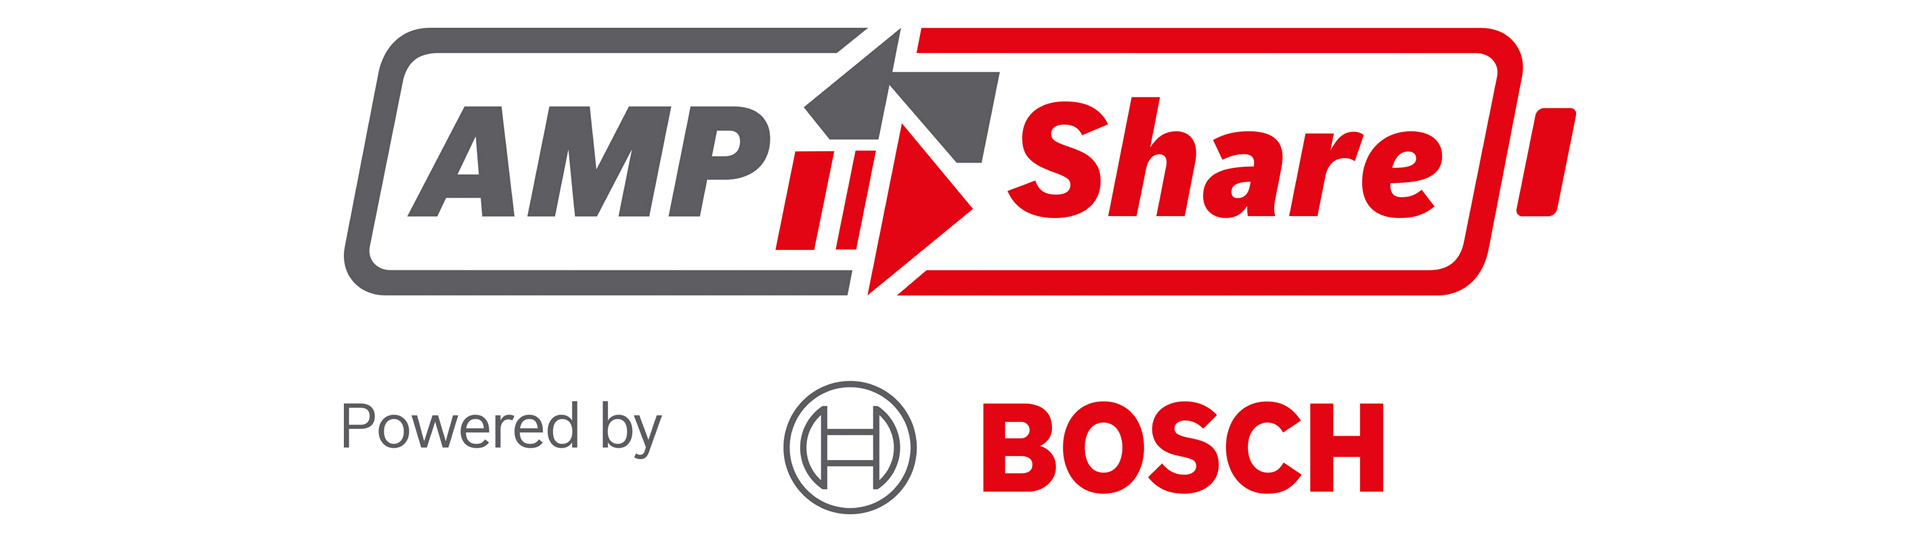 AmpShare ‒ powered by Bosch